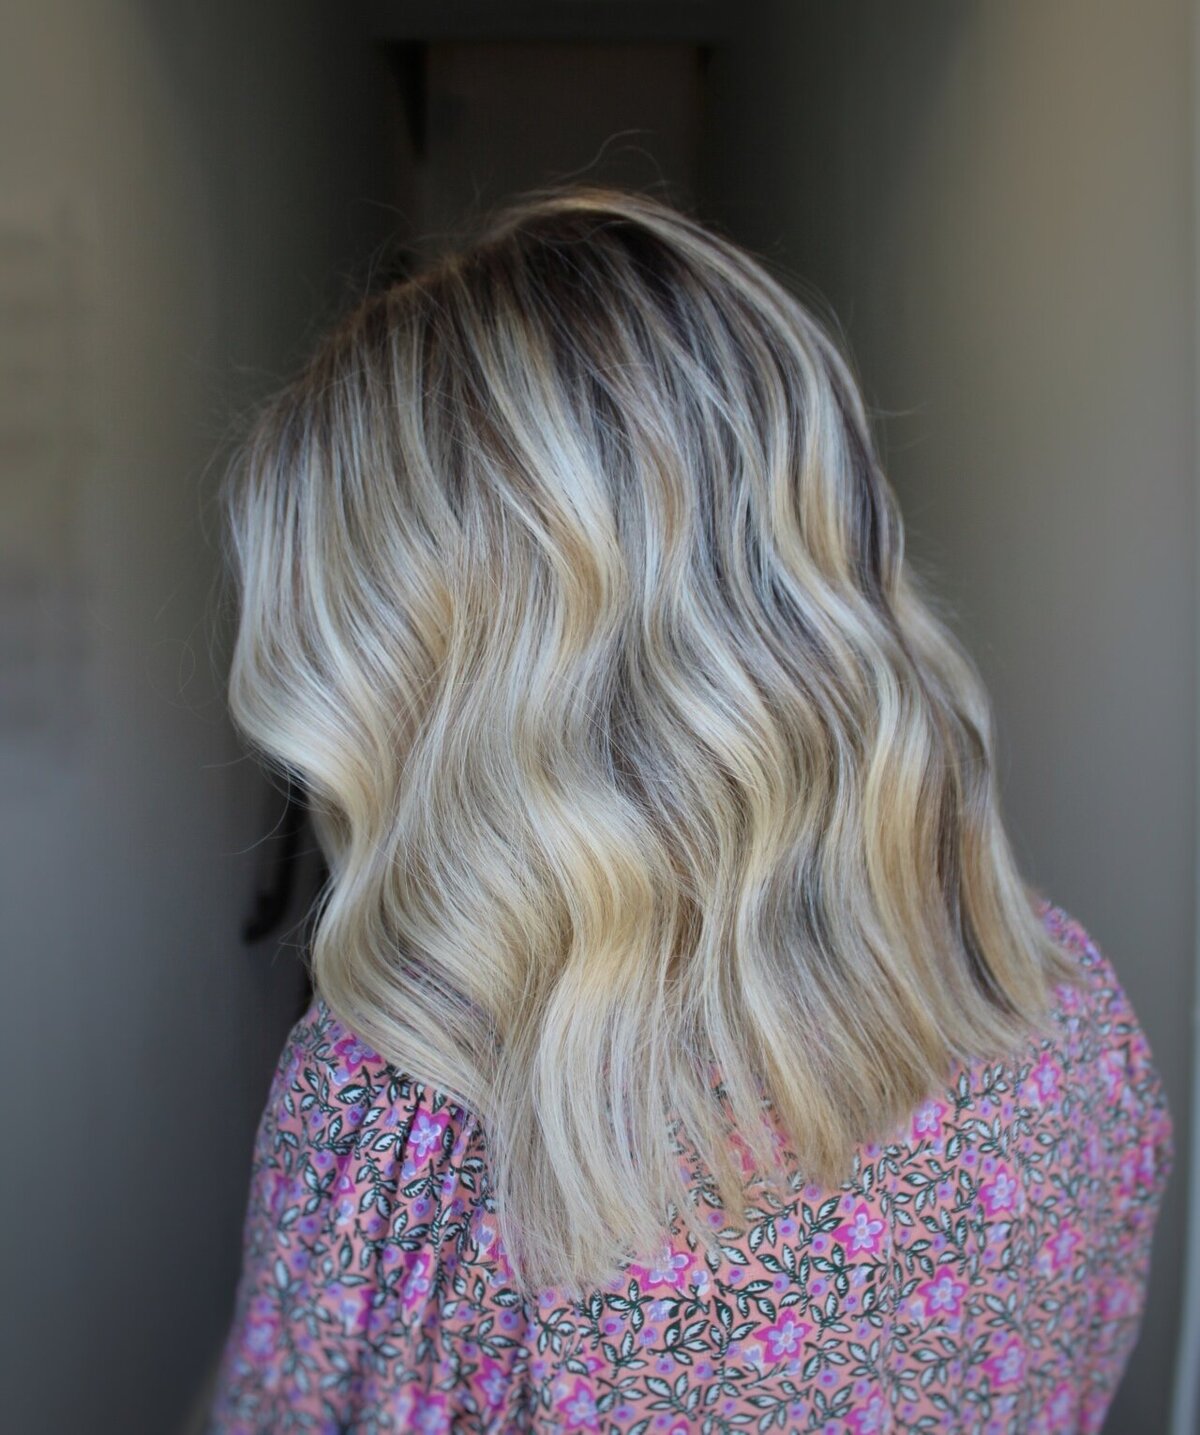 Rear view of wavy blonde highlighted hair with dark roots